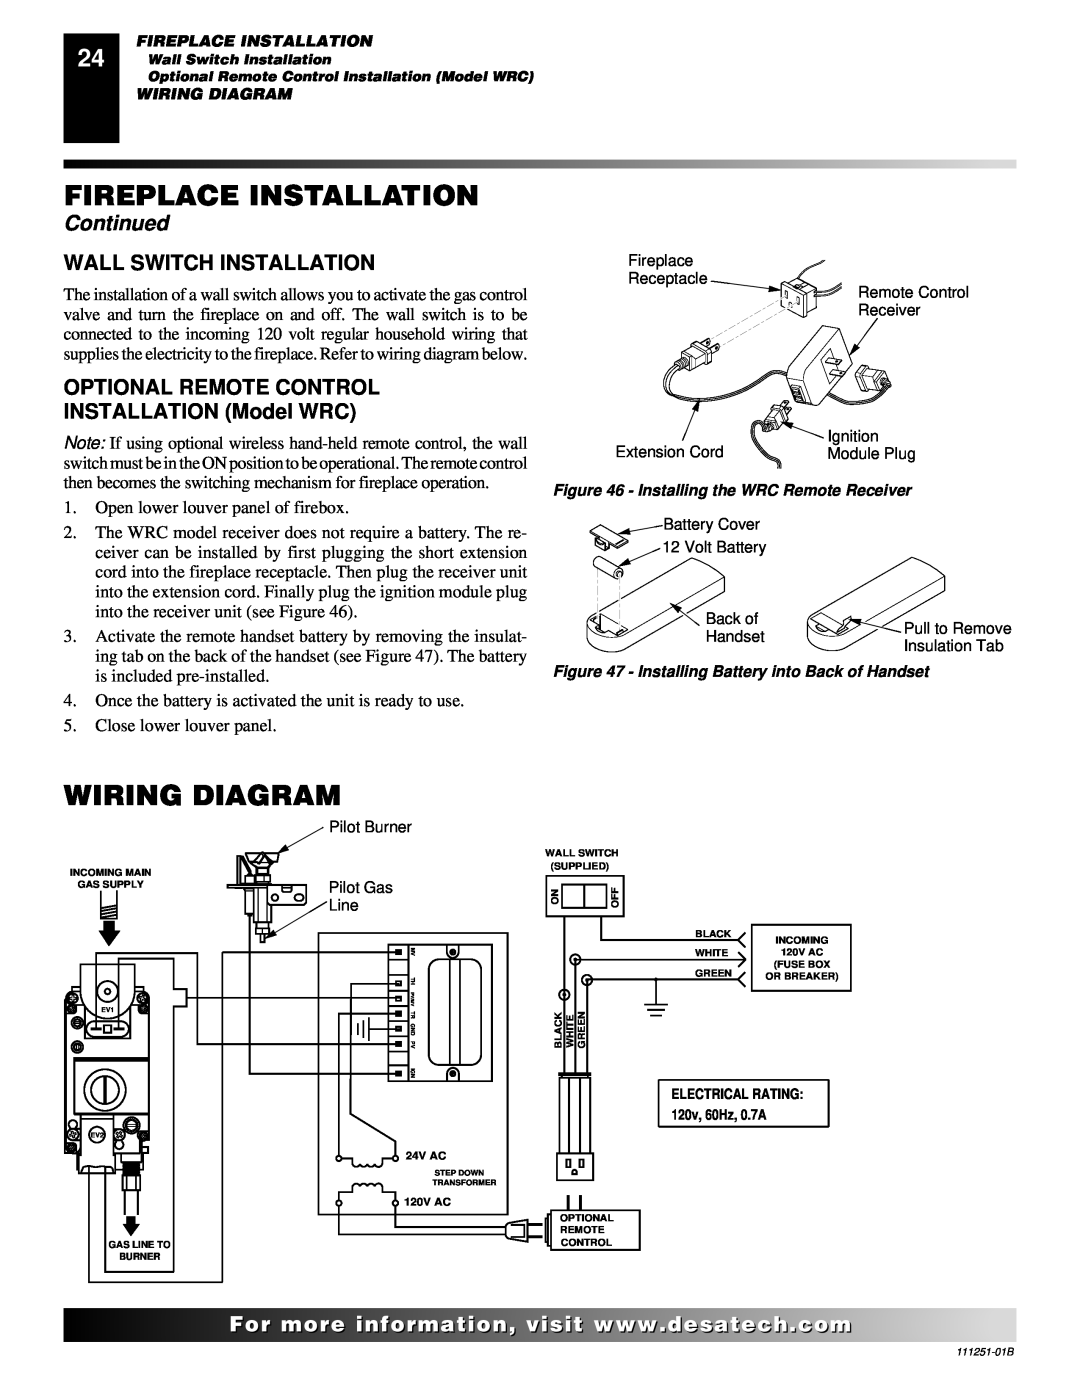 Desa (V)T36ENA installation manual Wiring Diagram, Fireplace Installation, Continued, Wall Switch Installation 